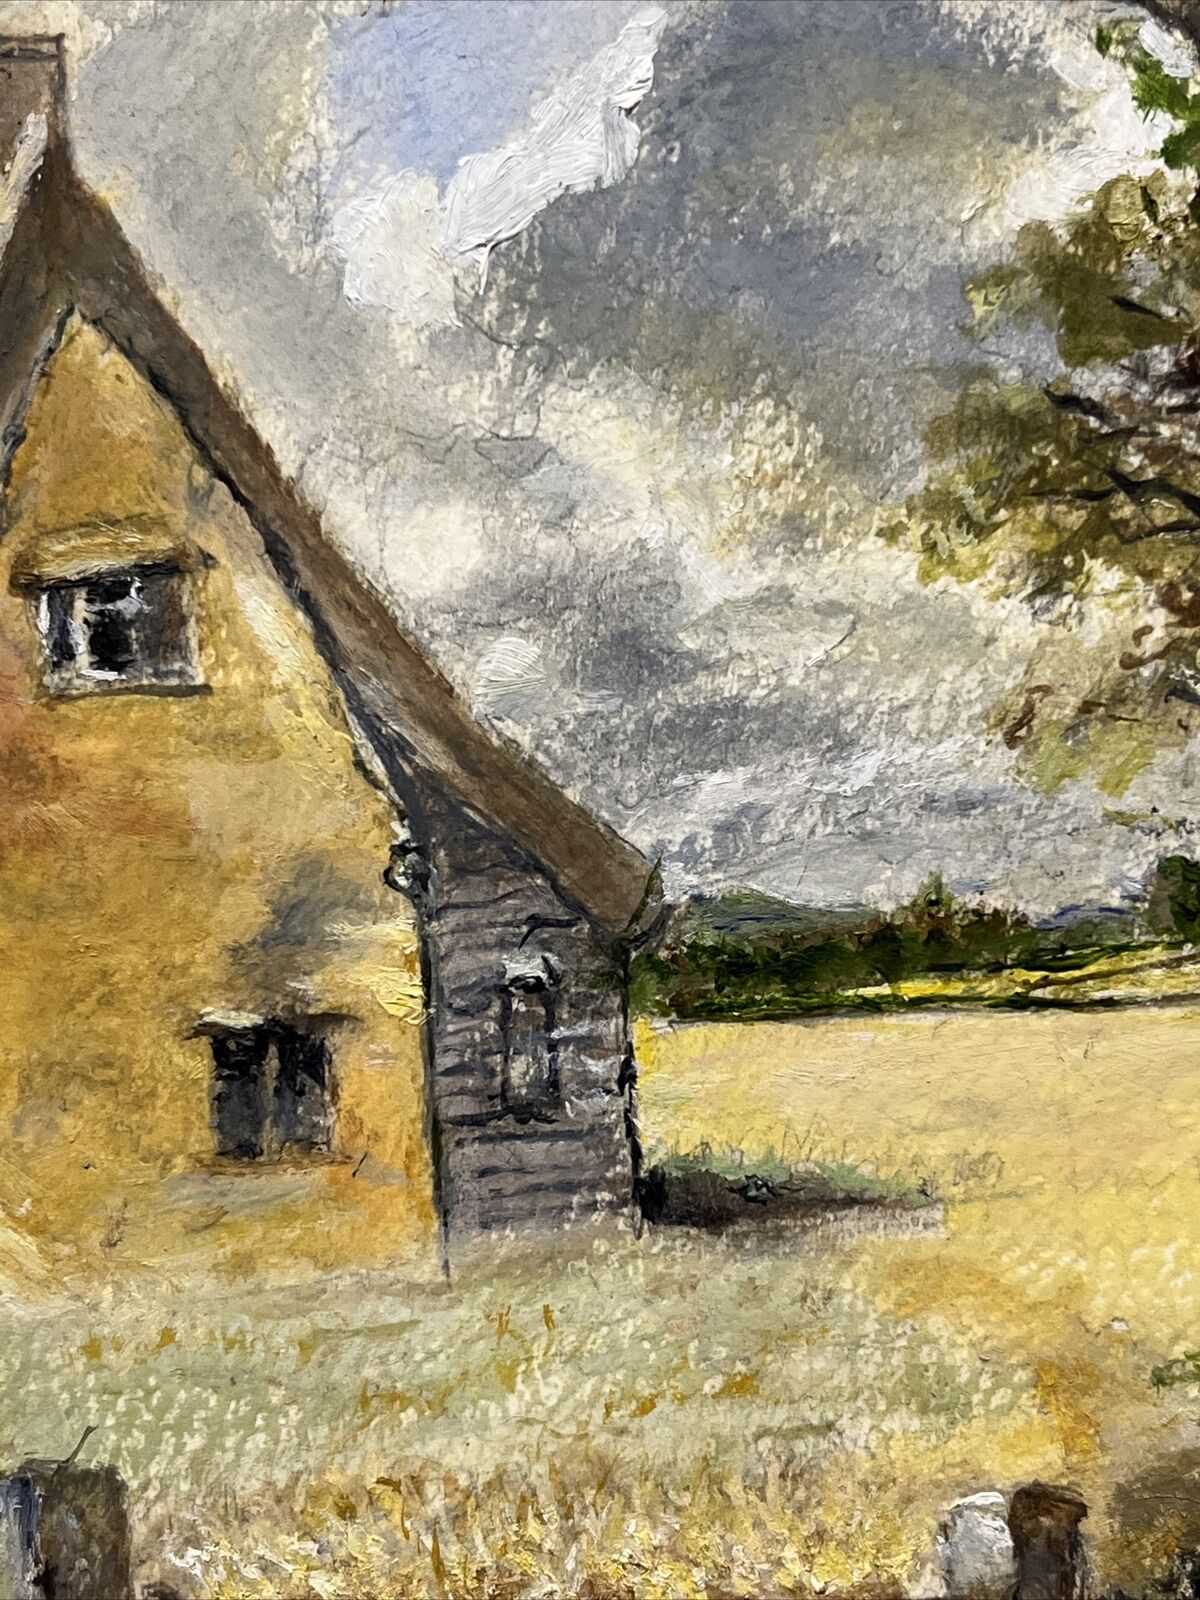 Constables “Cottage In A Cornfield “ By McCarthy